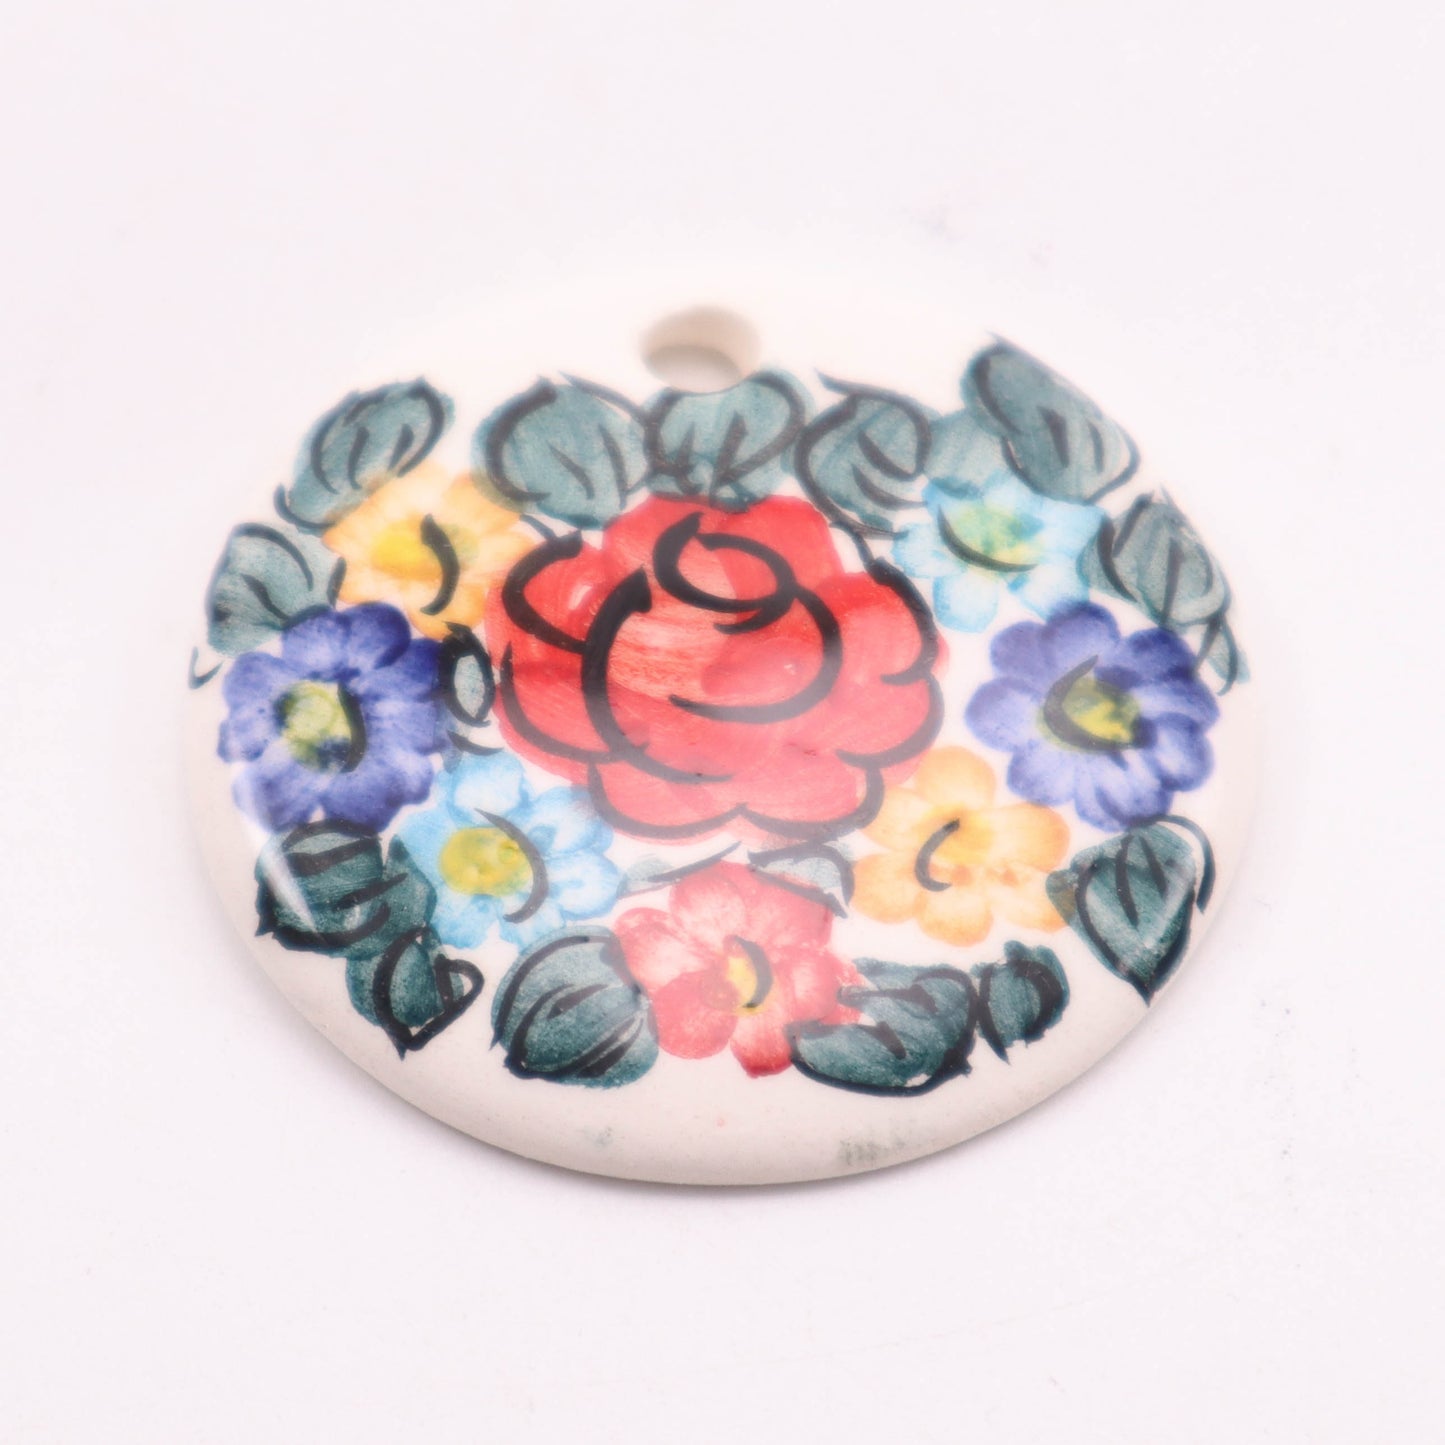 2" Round Pendant. Pattern: Colorful